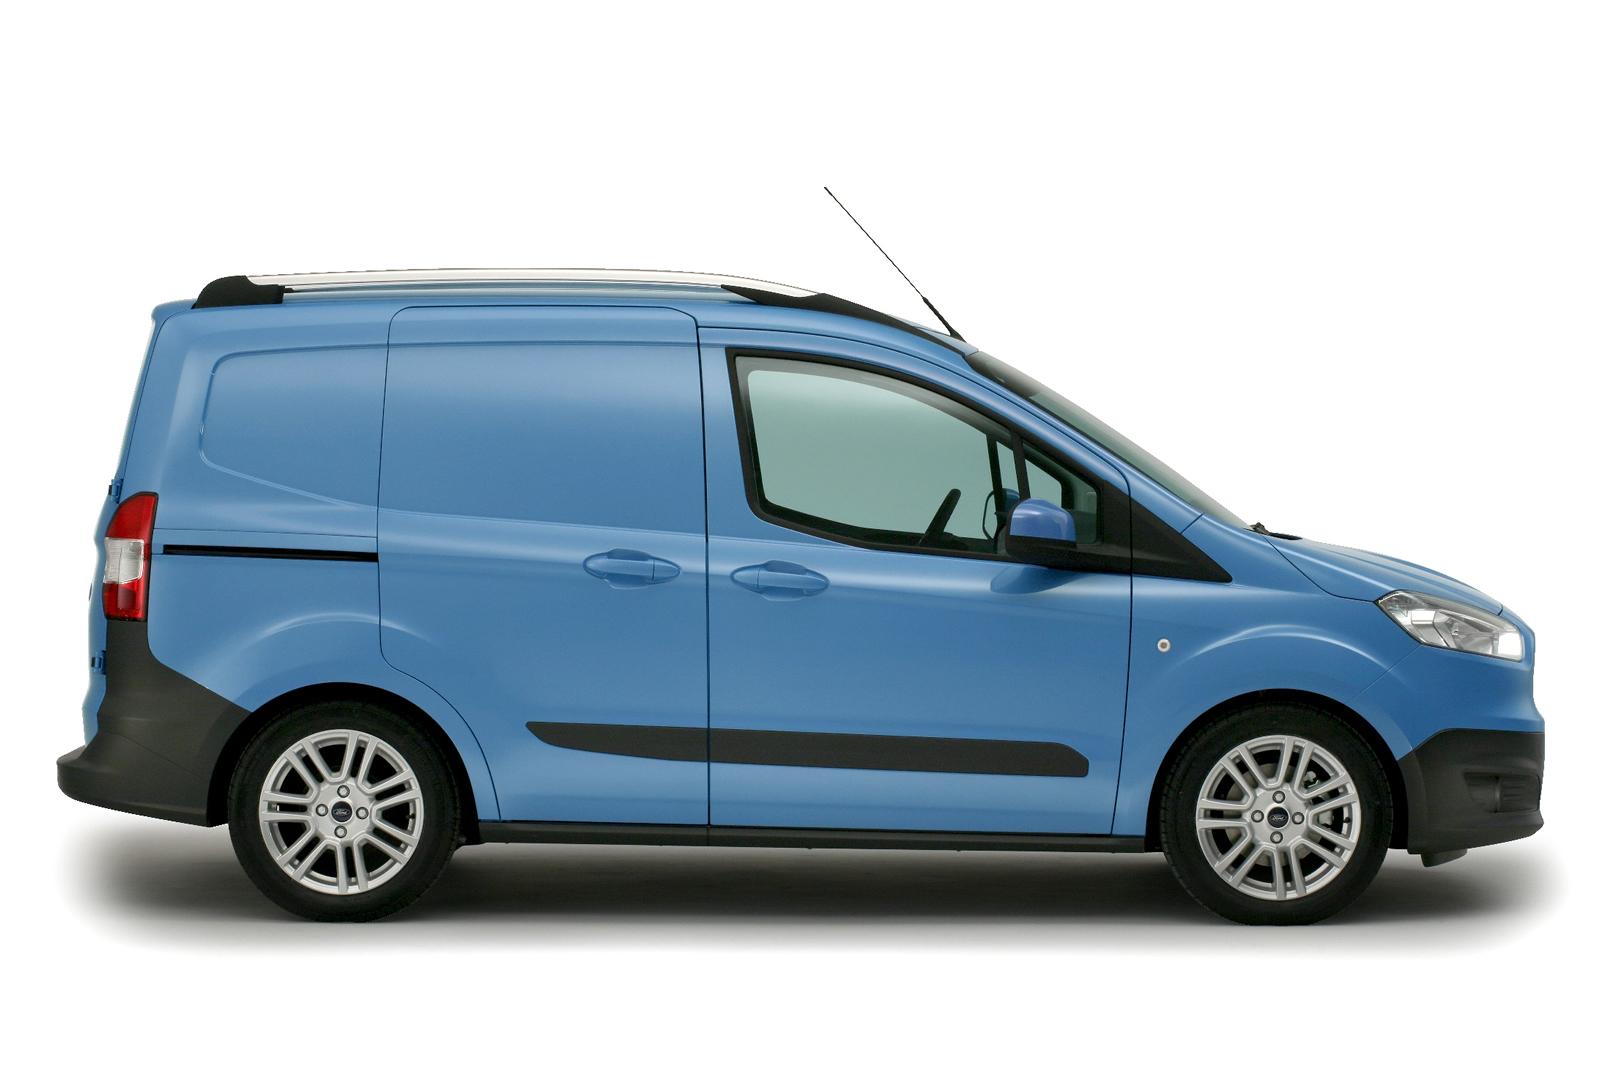 Ford Transit Courier revealed in Birmingham